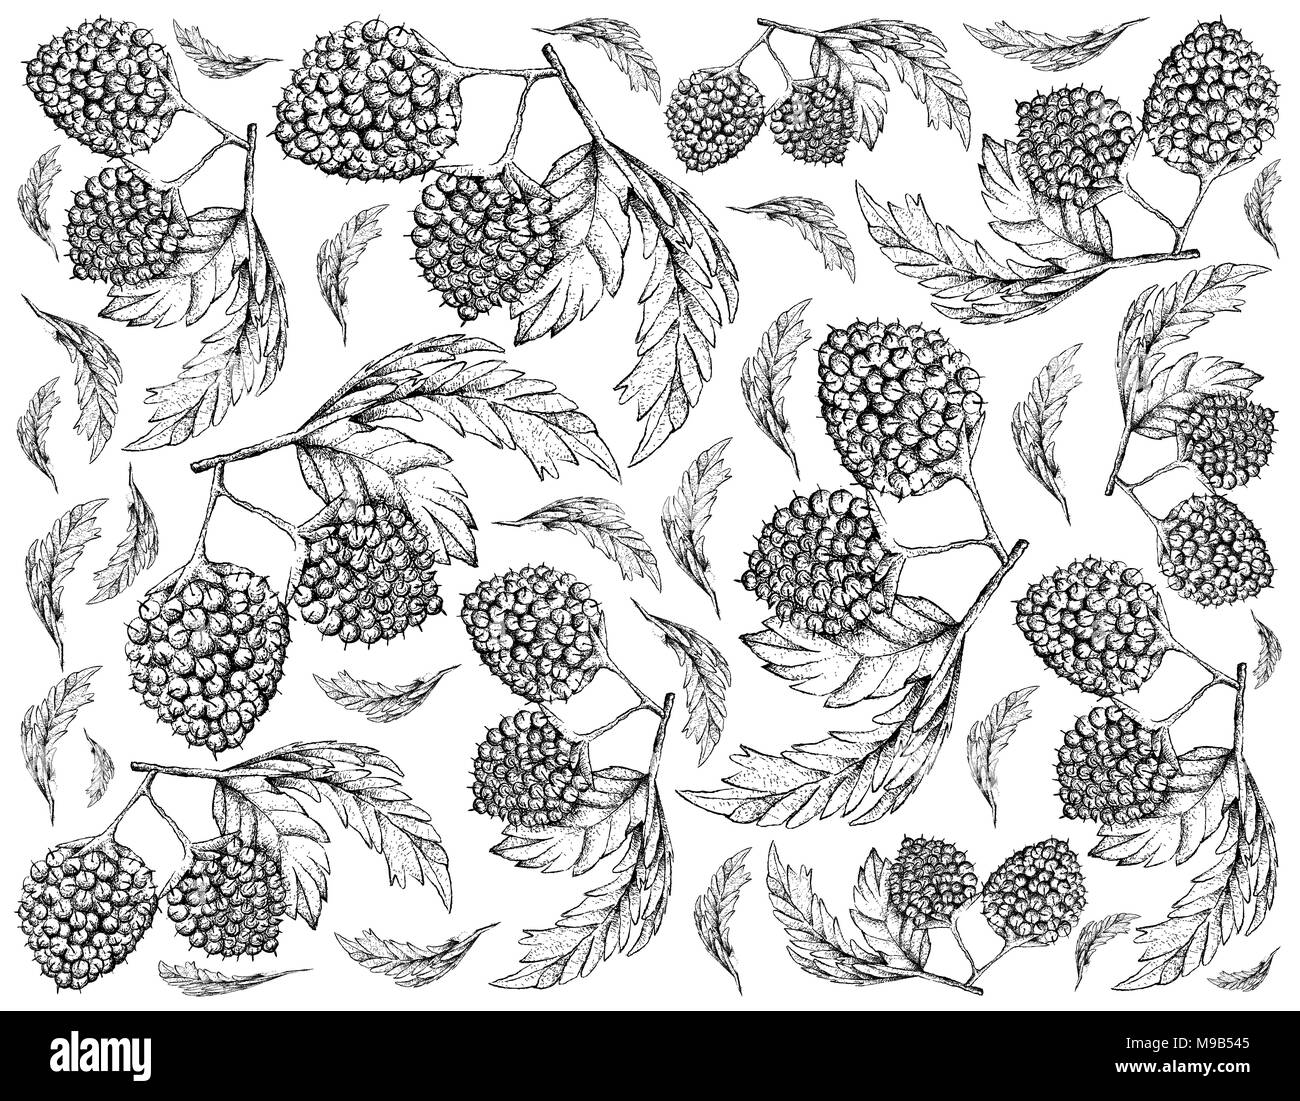 Berry Fruit, Illustration Wallpaper Background of Hand Drawn Sketch of Fresh Balloon Berries or Rubus Illecebrosus Fruits. Stock Photo